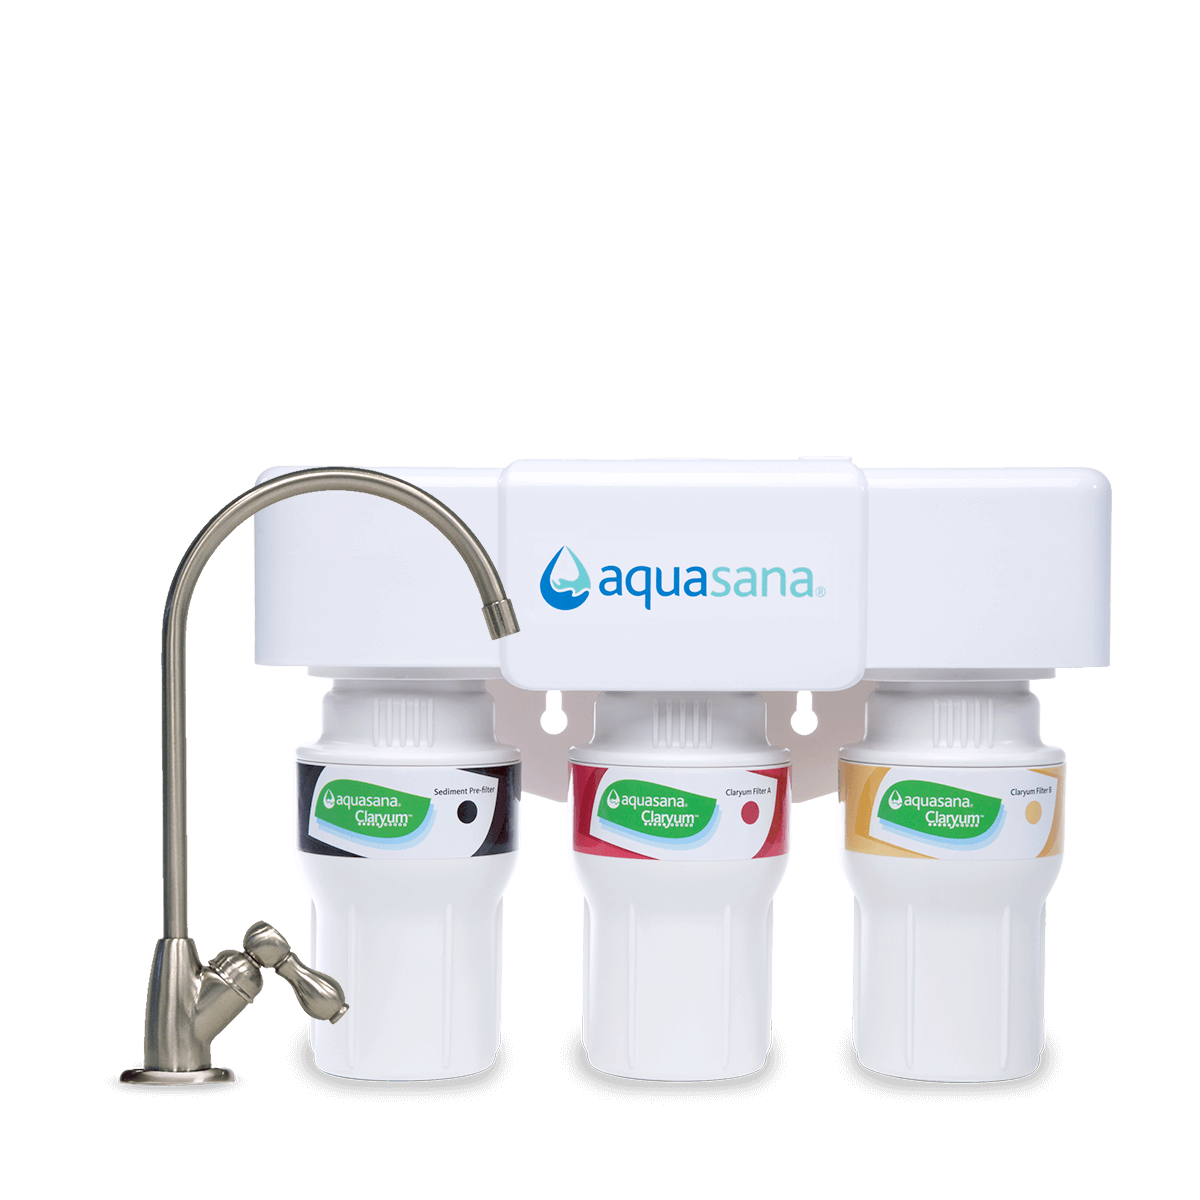 New AQUASANA UNDERCOUNT WATER FILTER HOUSING REPLACEMENT,NO WATER FILTERS INSIDE